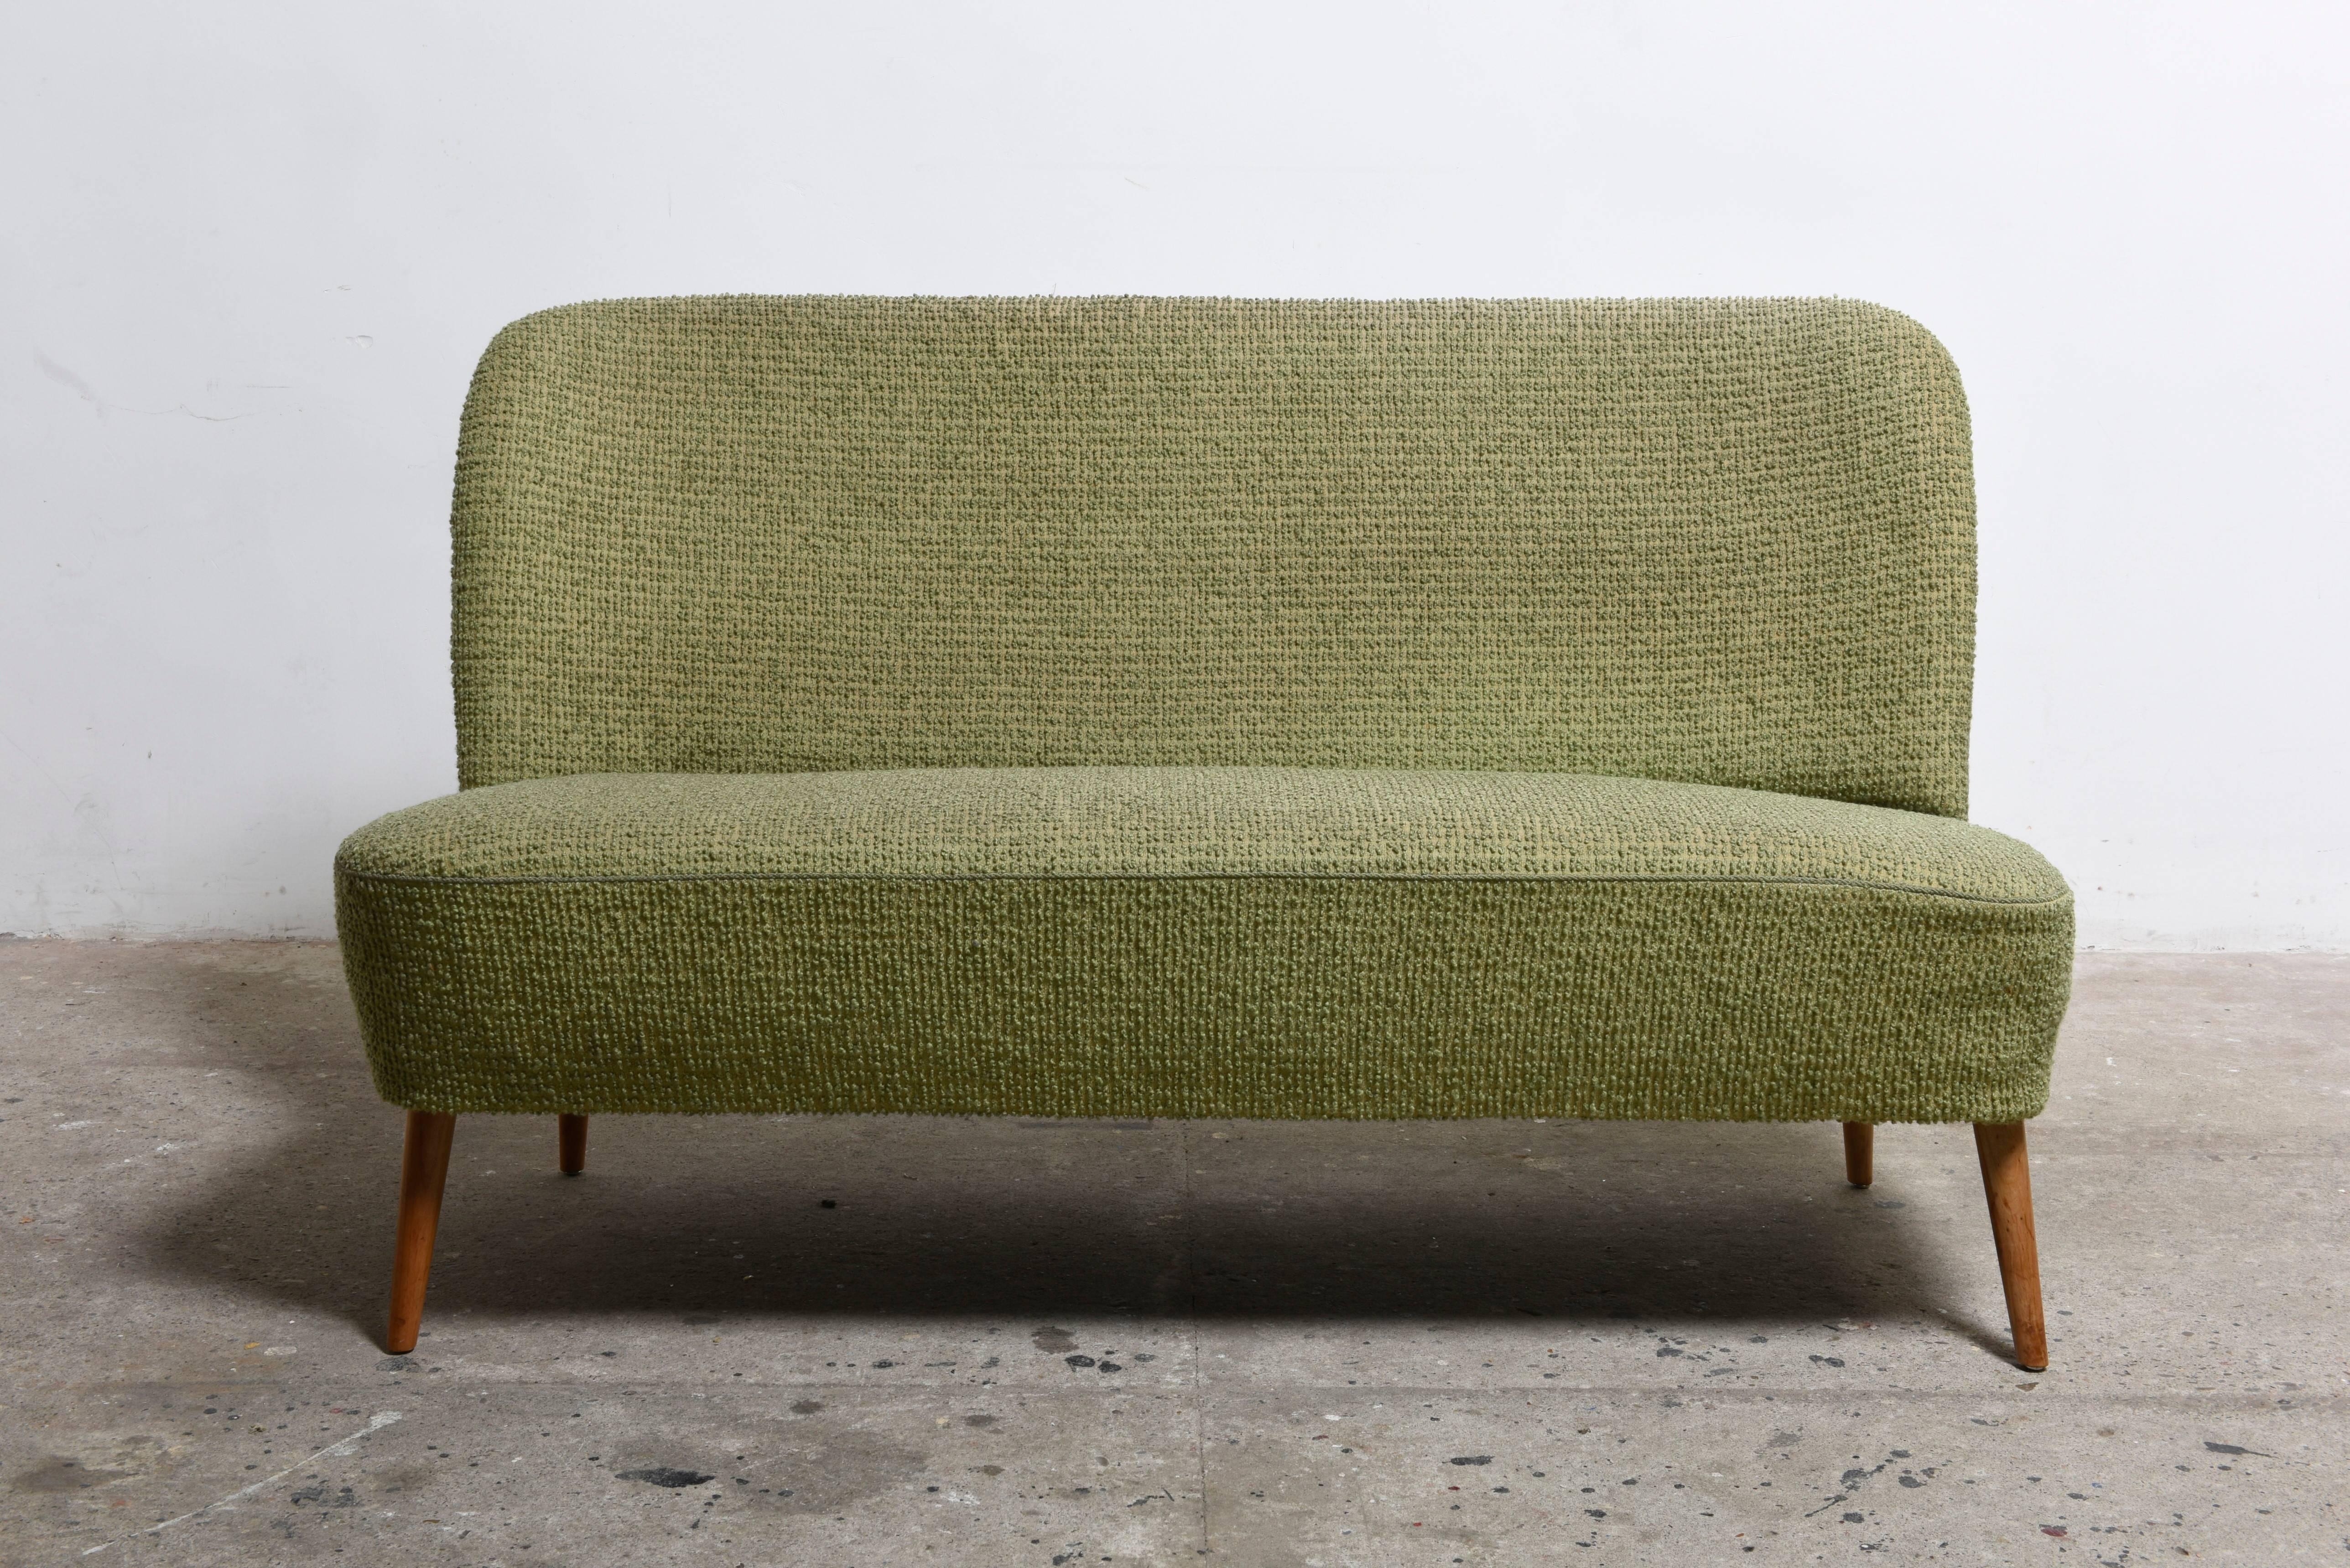 Great and rare 1950s Artifort loveseat,cocktail bench.
Normal seat height a beautiful small version make the green sofa very special.